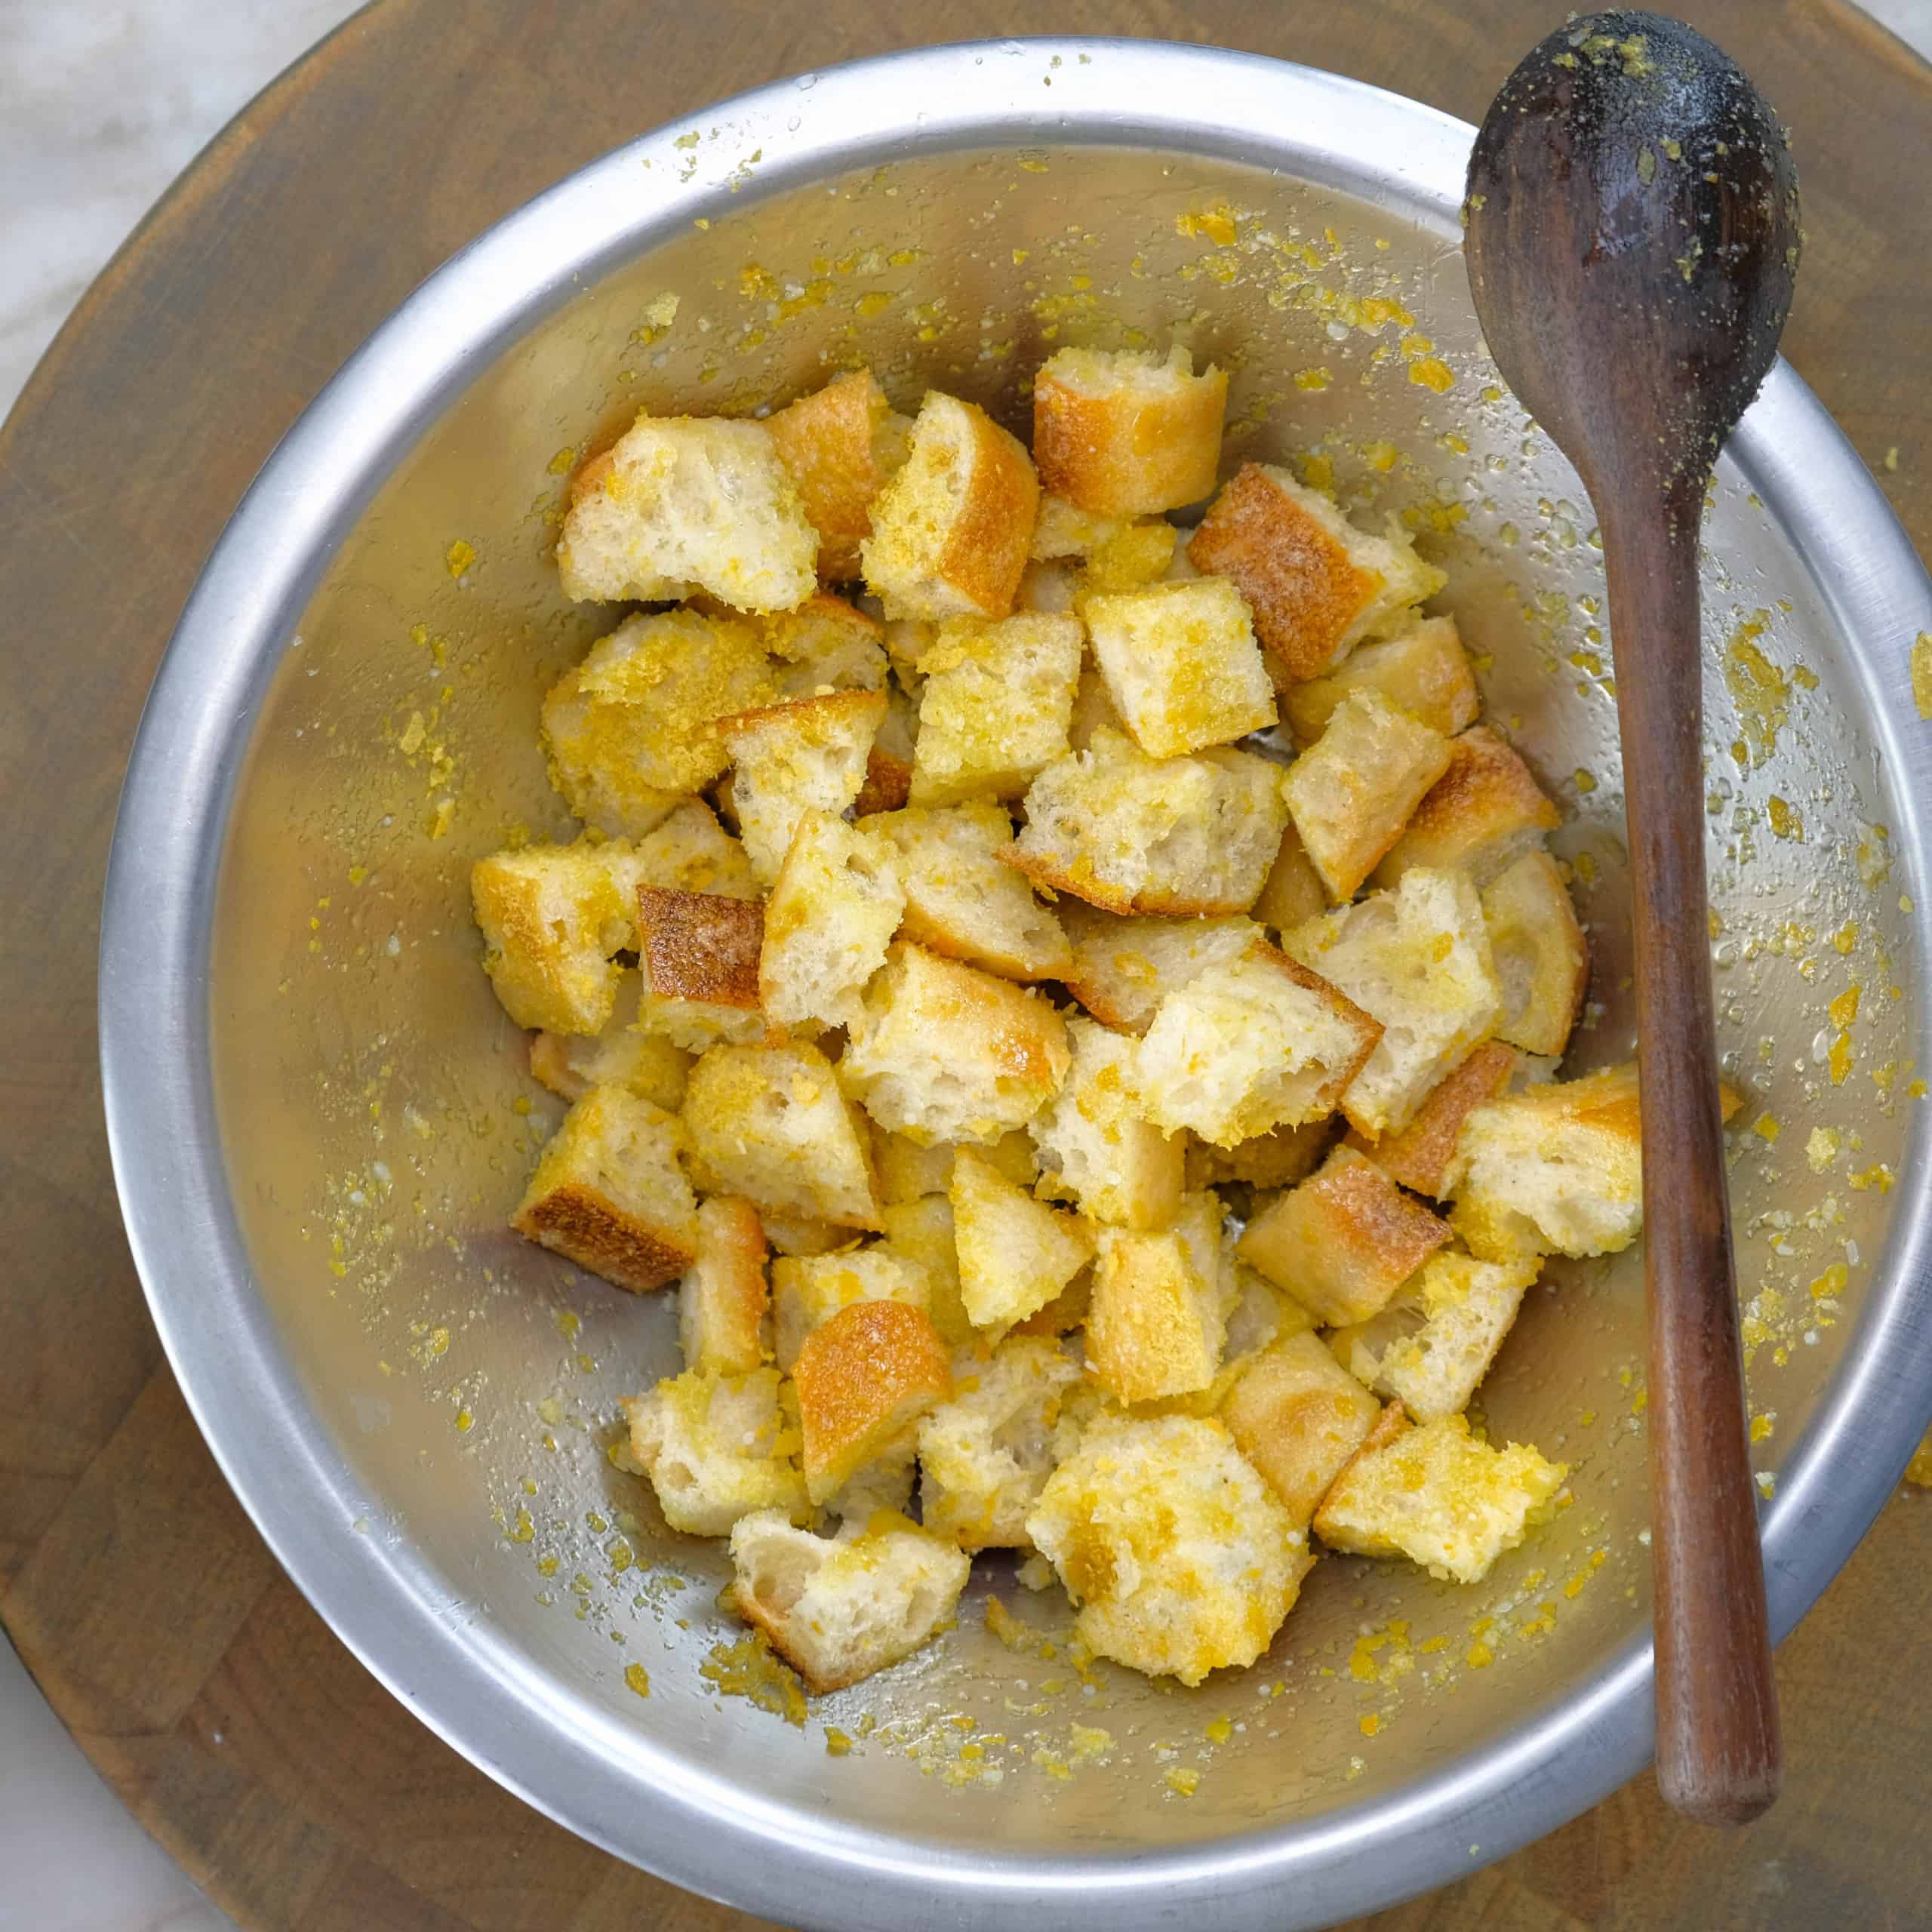 DICED BREAD, SEASONED WITH GARLIC, NUTRITIONAL YEAST, OLIVE OIL FOR CROUTONS,_